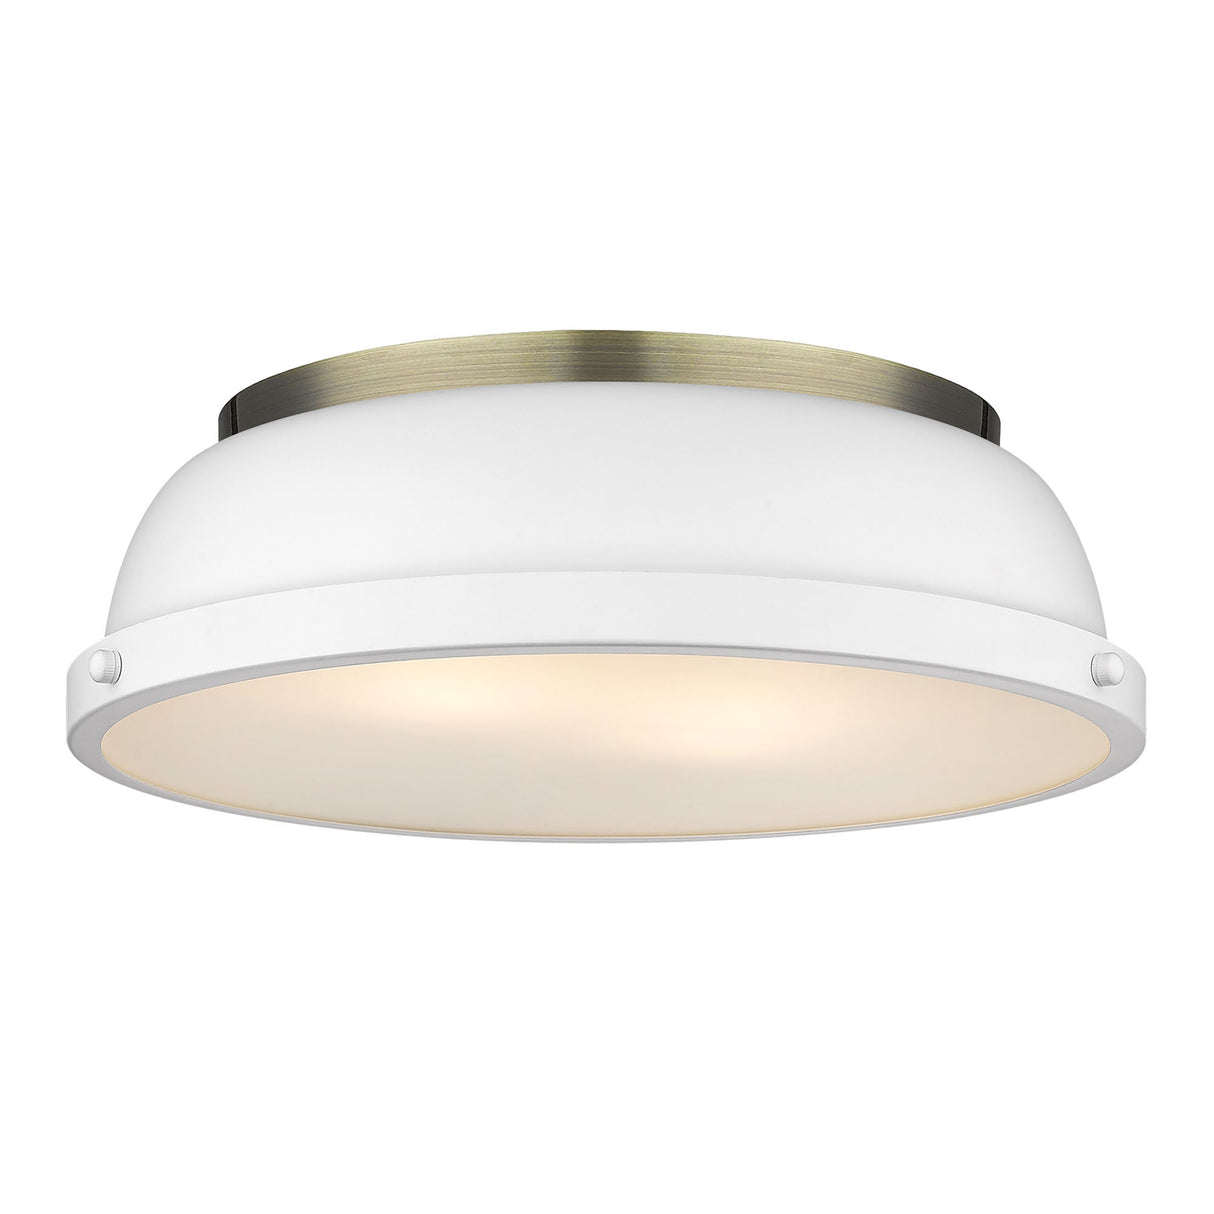 Duncan 14" Flush Mount in Aged Brass with a Matte White Shade